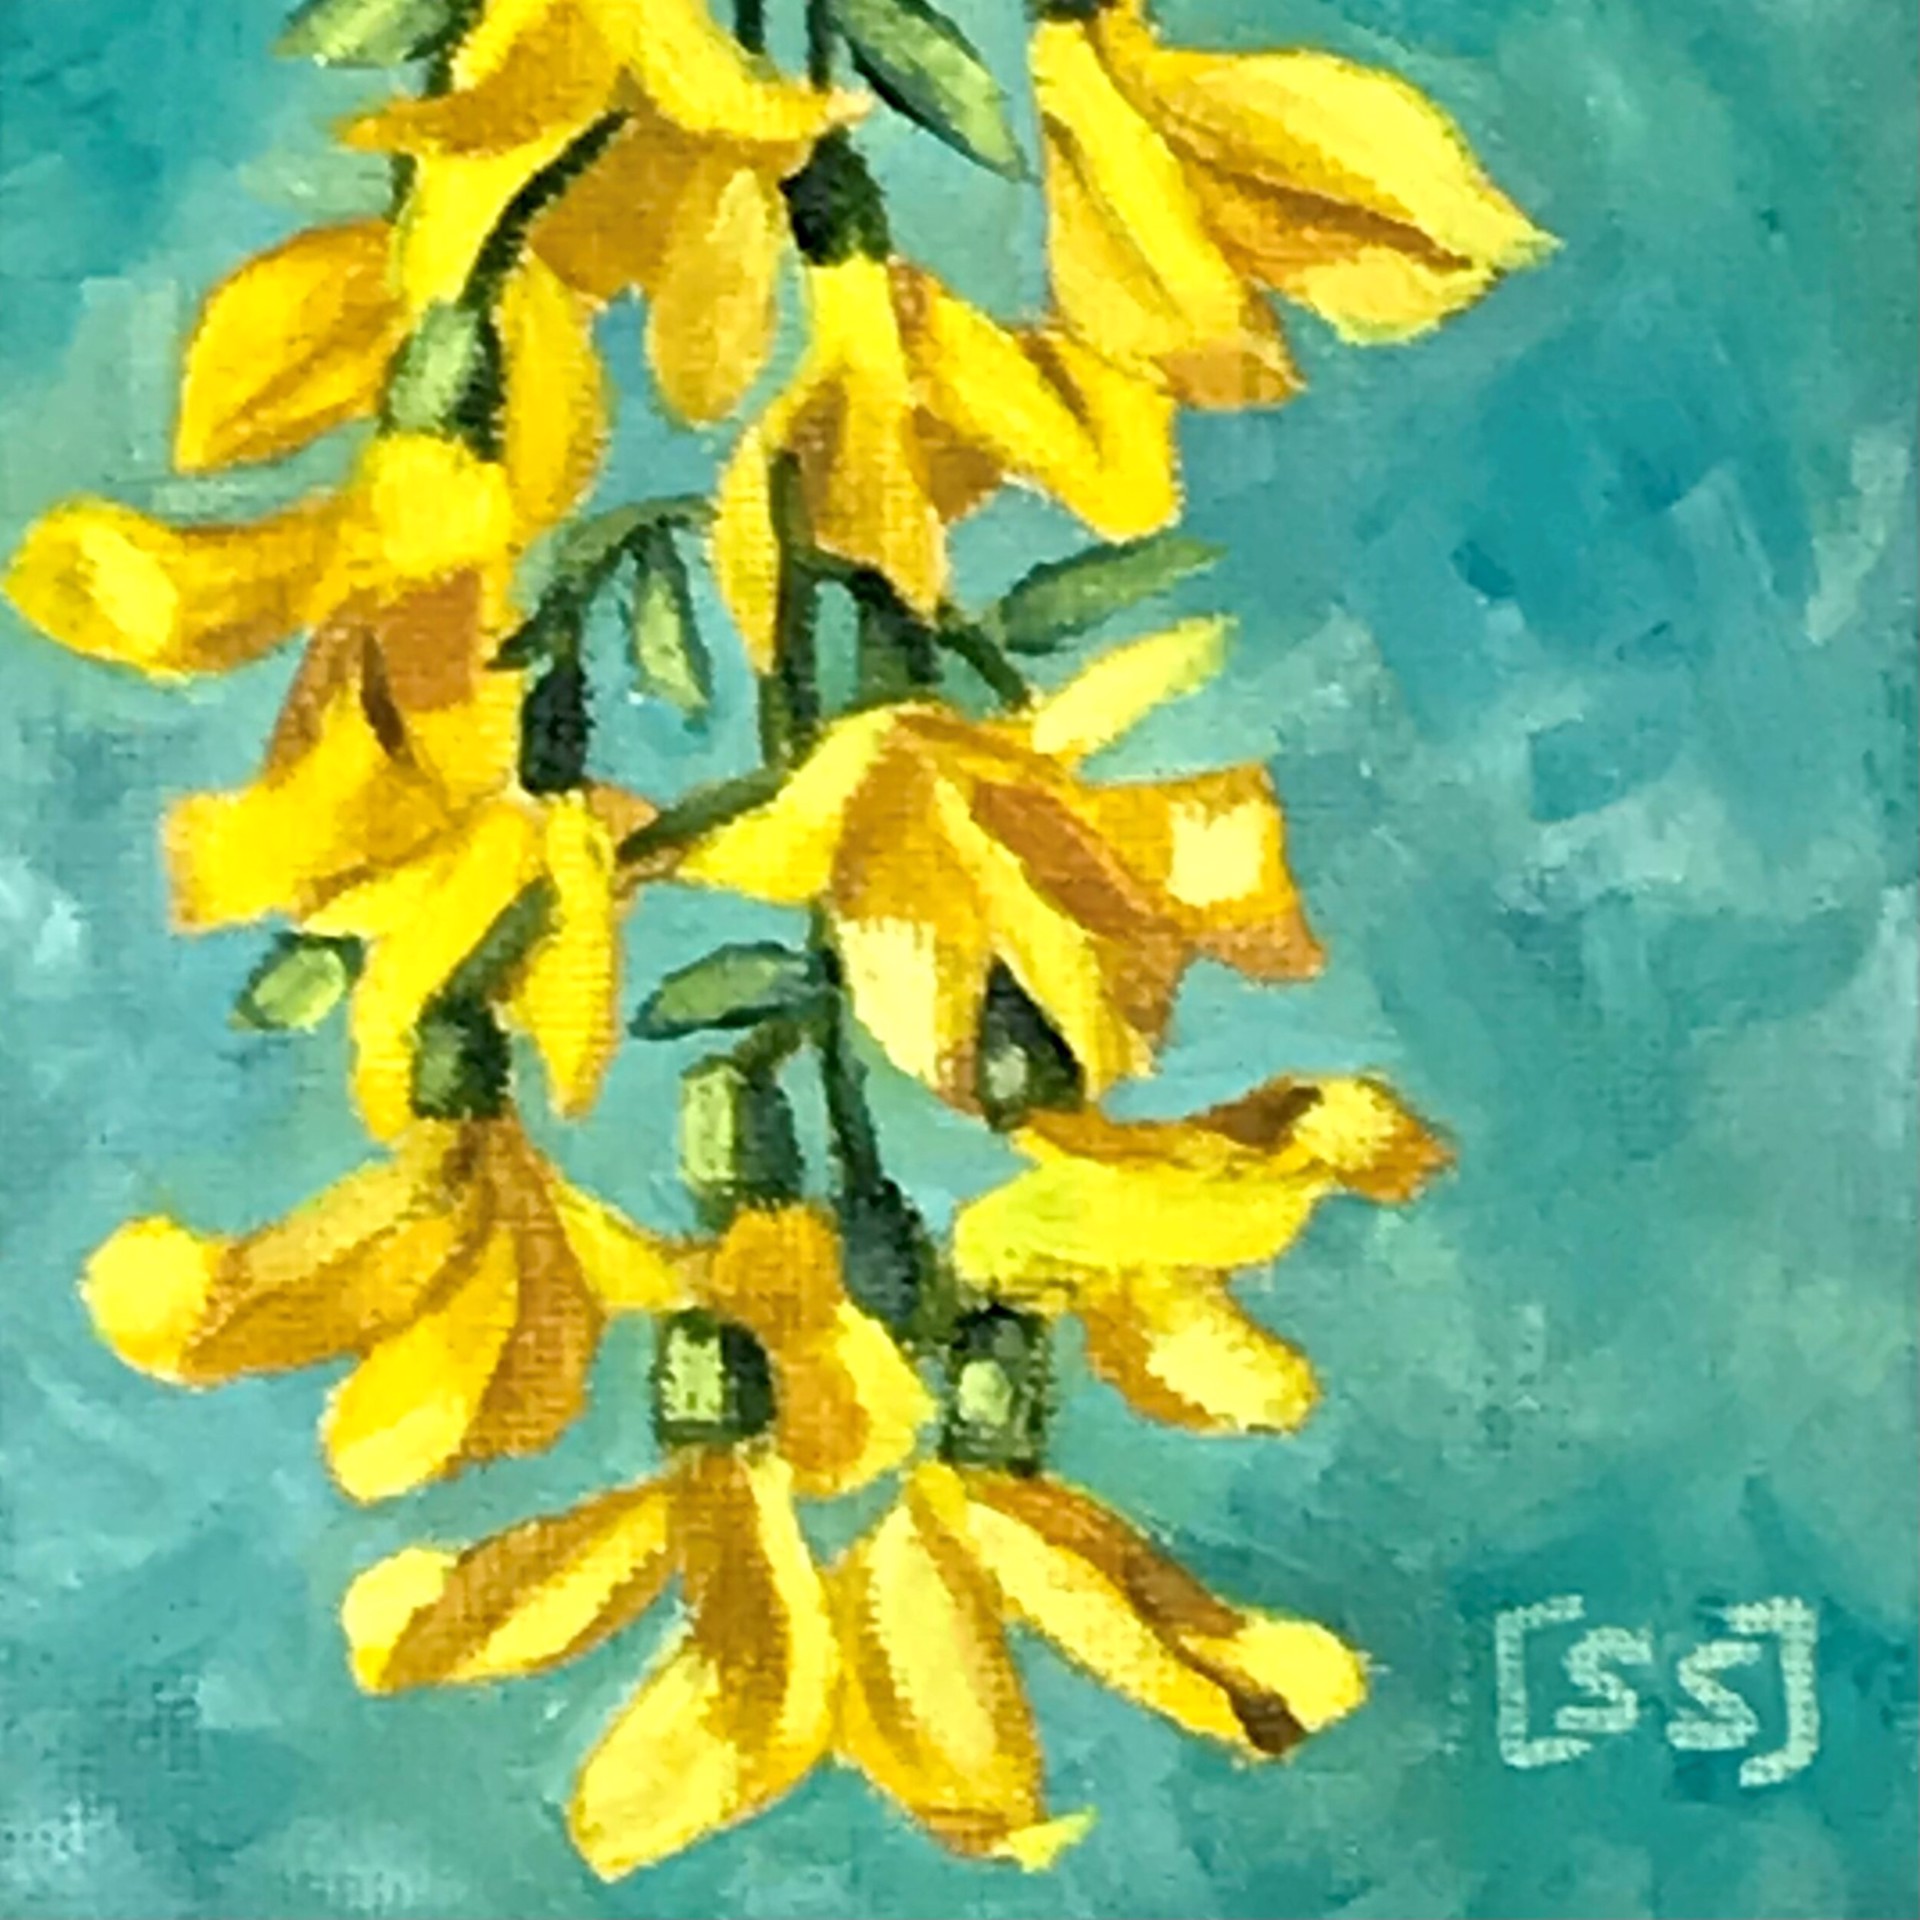 Golden Chain Cluster by Sharon Sudduth